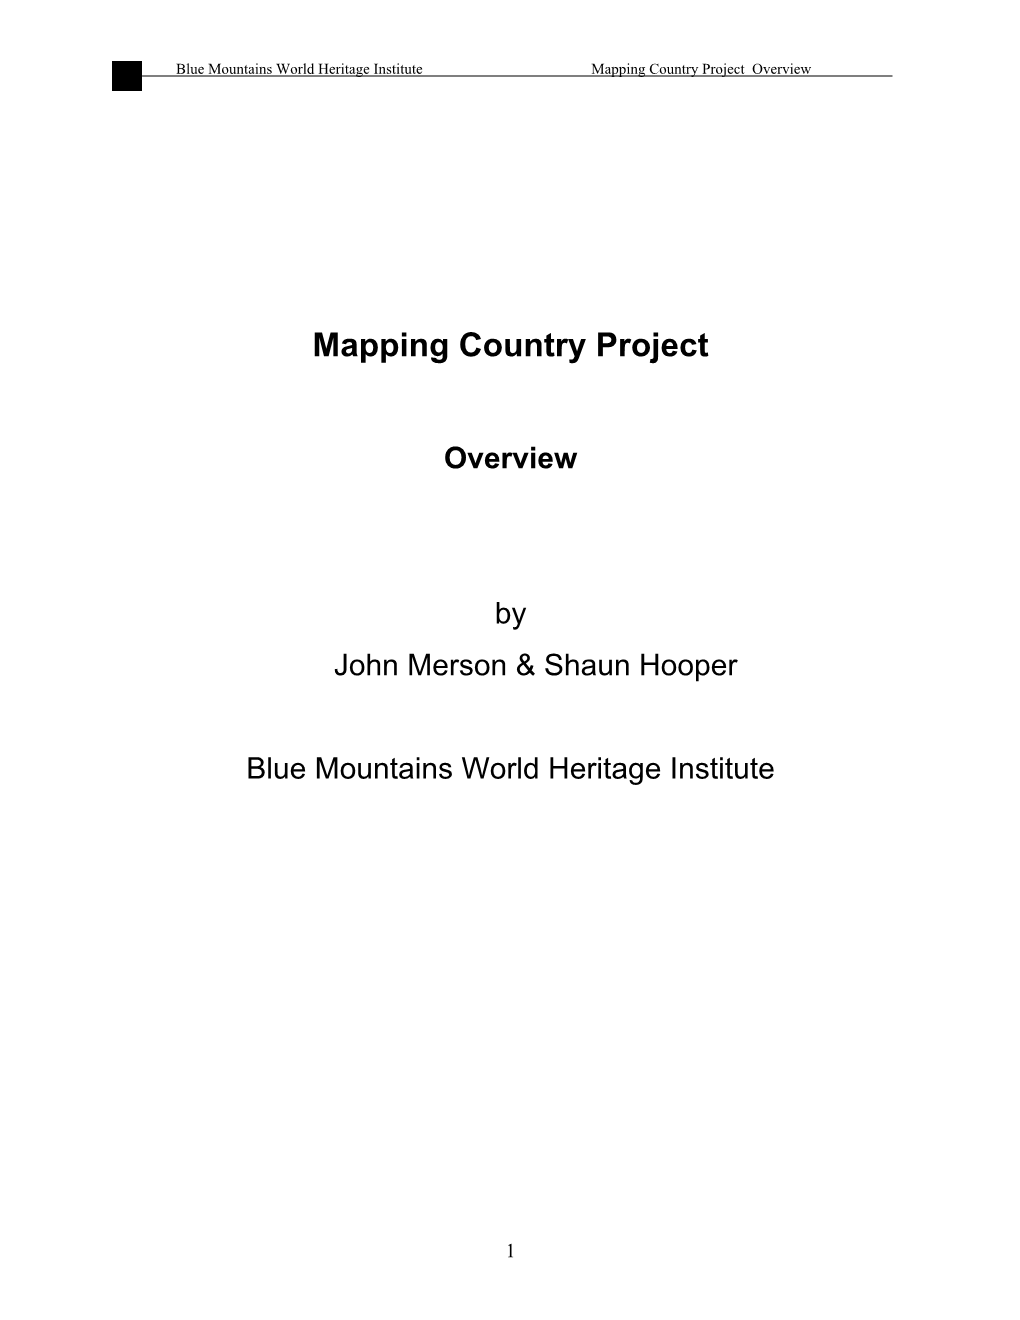 2006. Mapping Country Project Overview